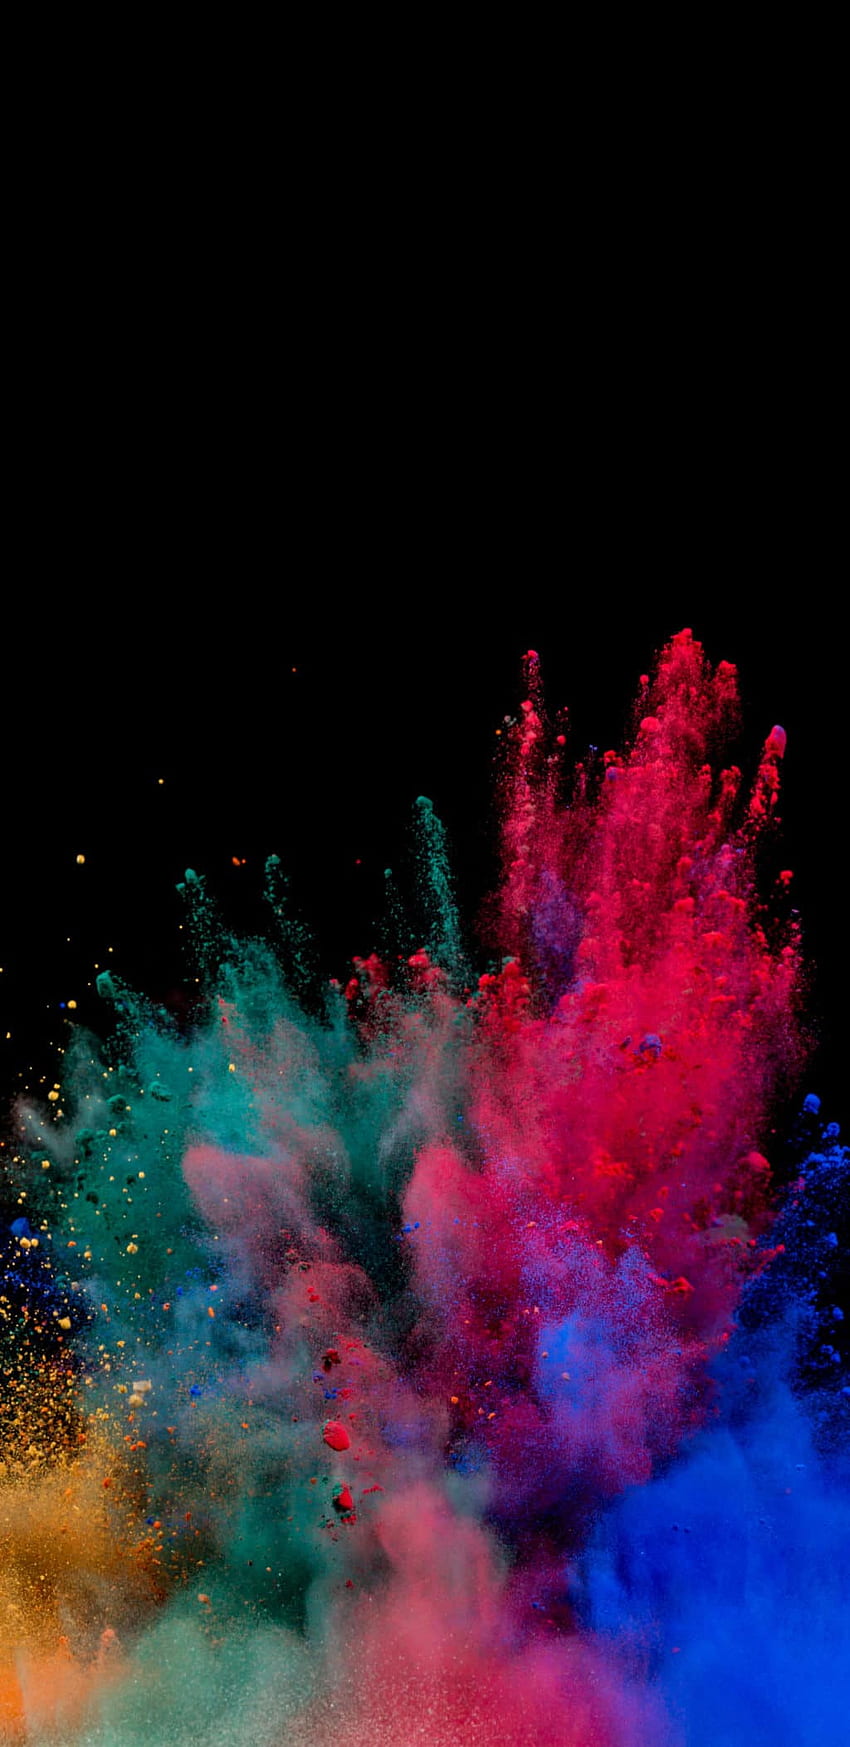 samsung galaxy s9 iPhone Wallpapers Free Download